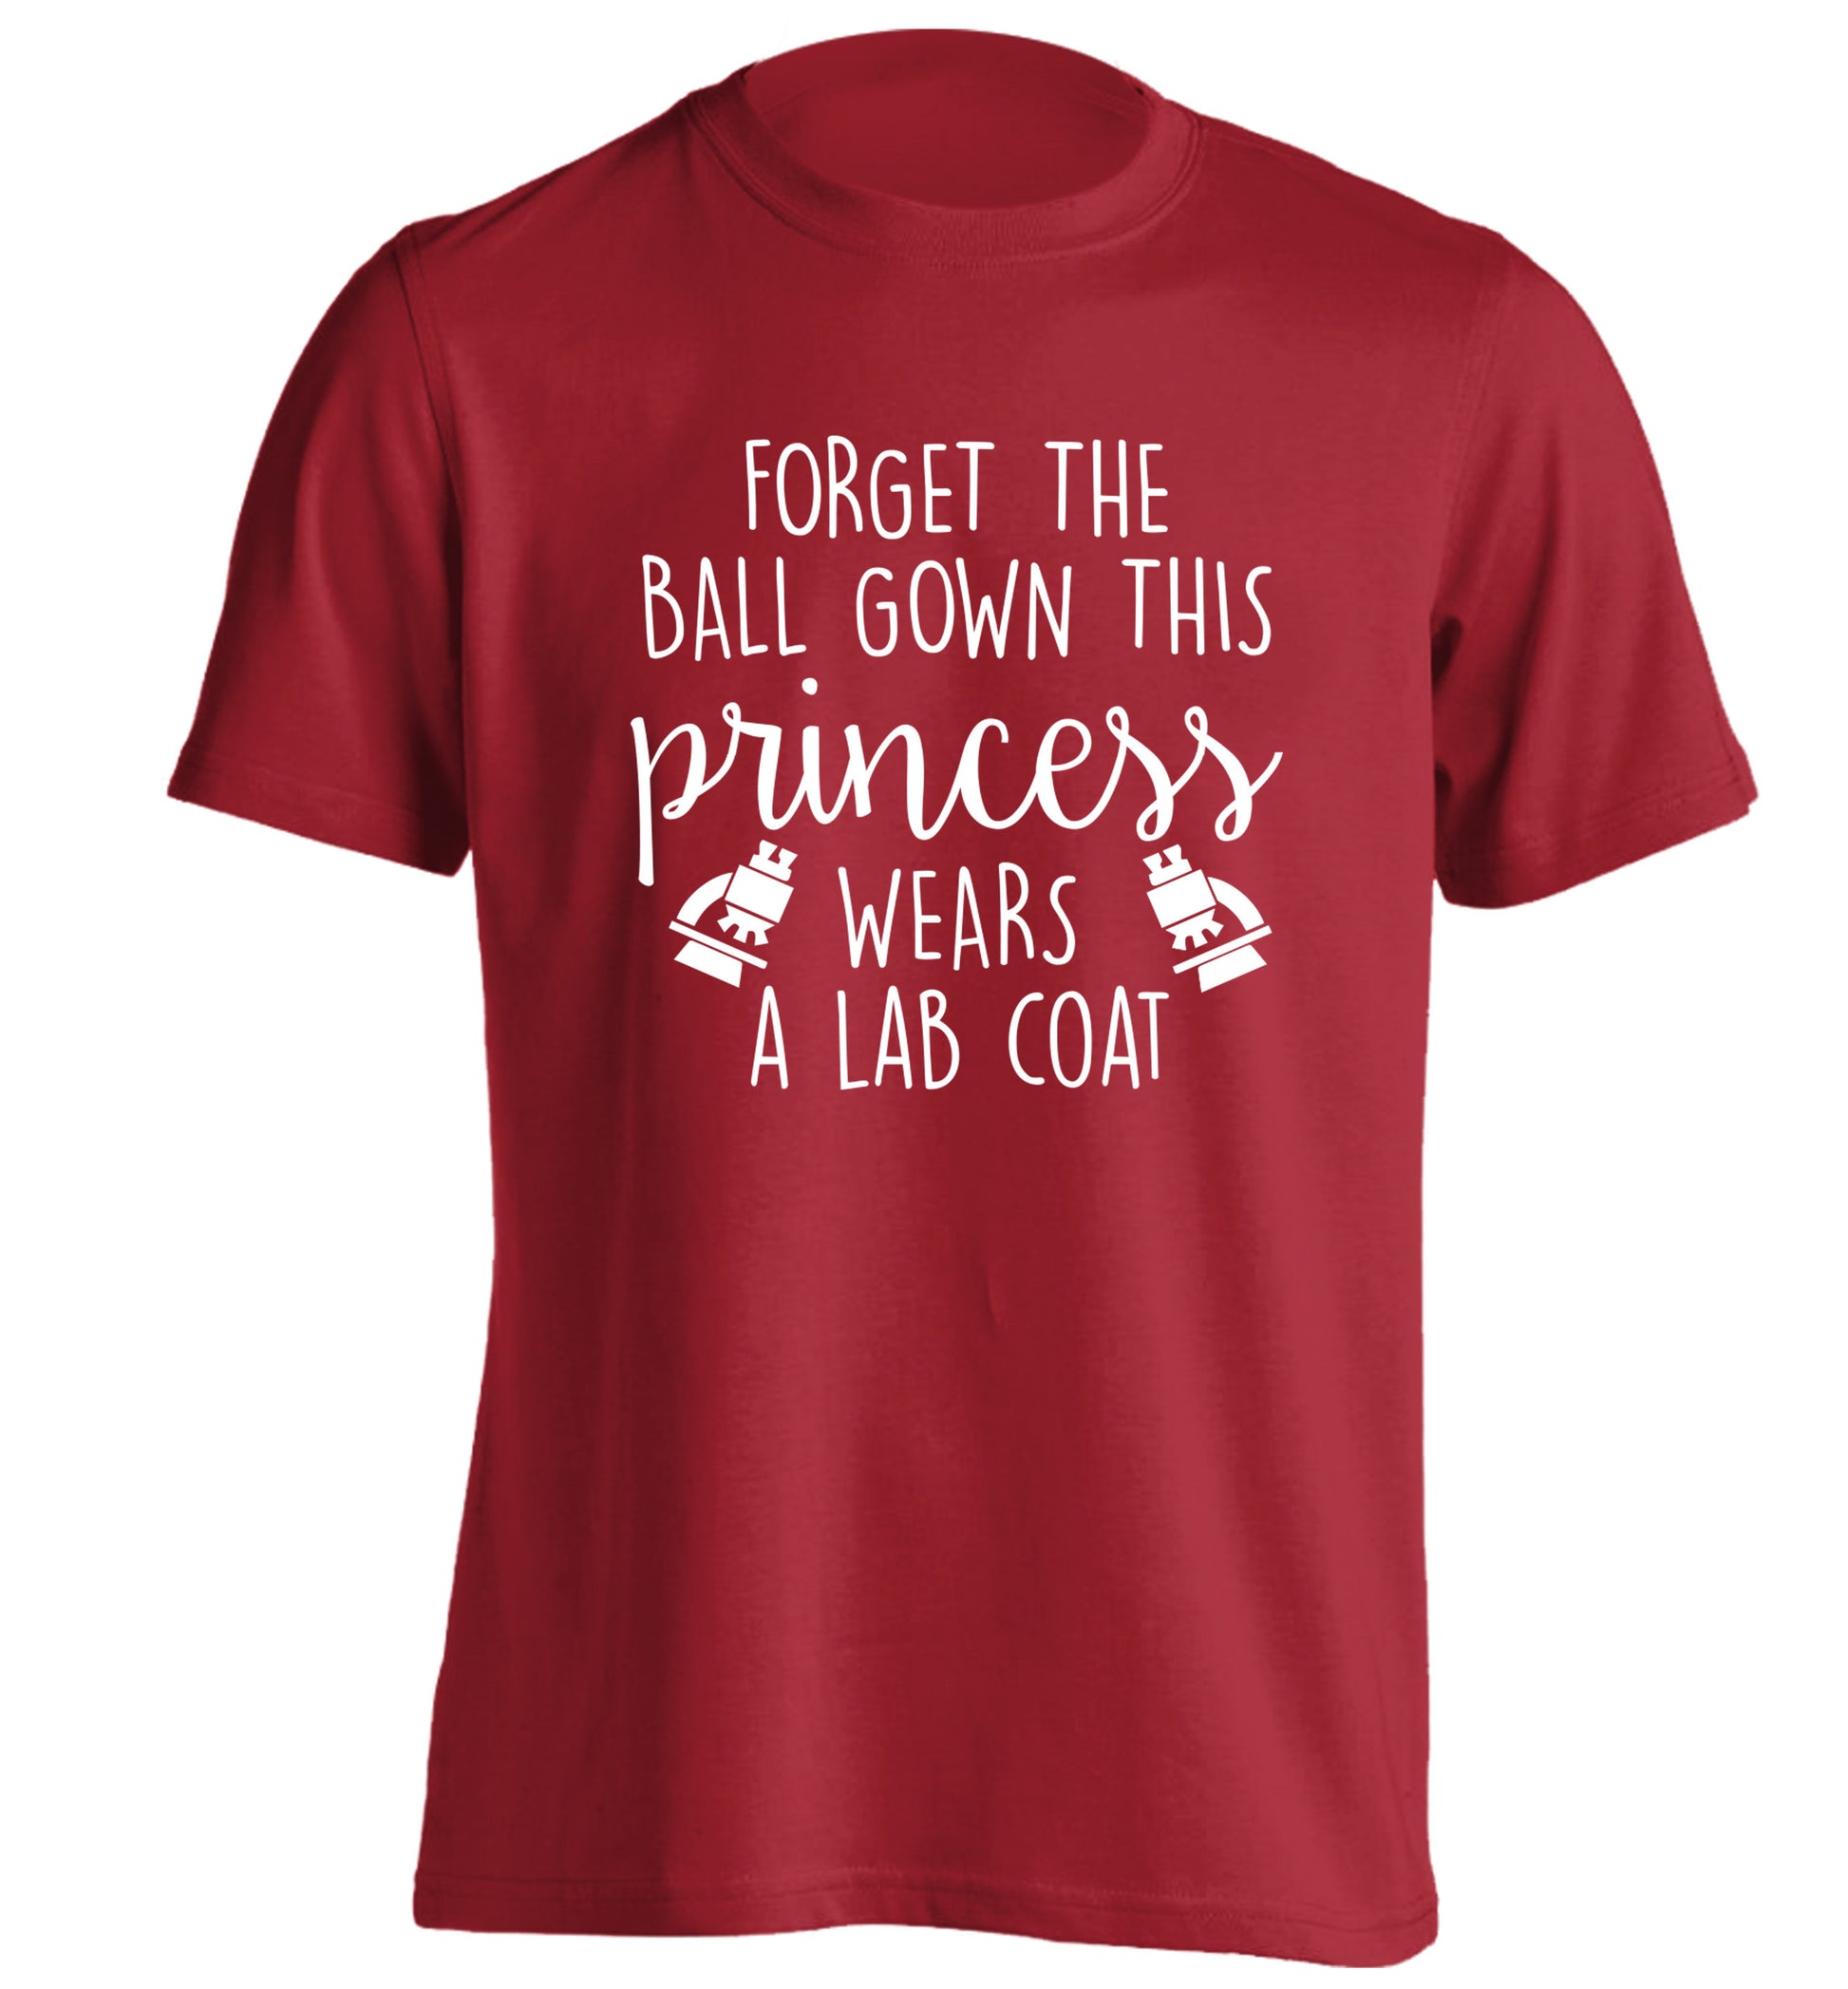 Forget the ball gown this princess wears a lab coat adults unisex red Tshirt 2XL